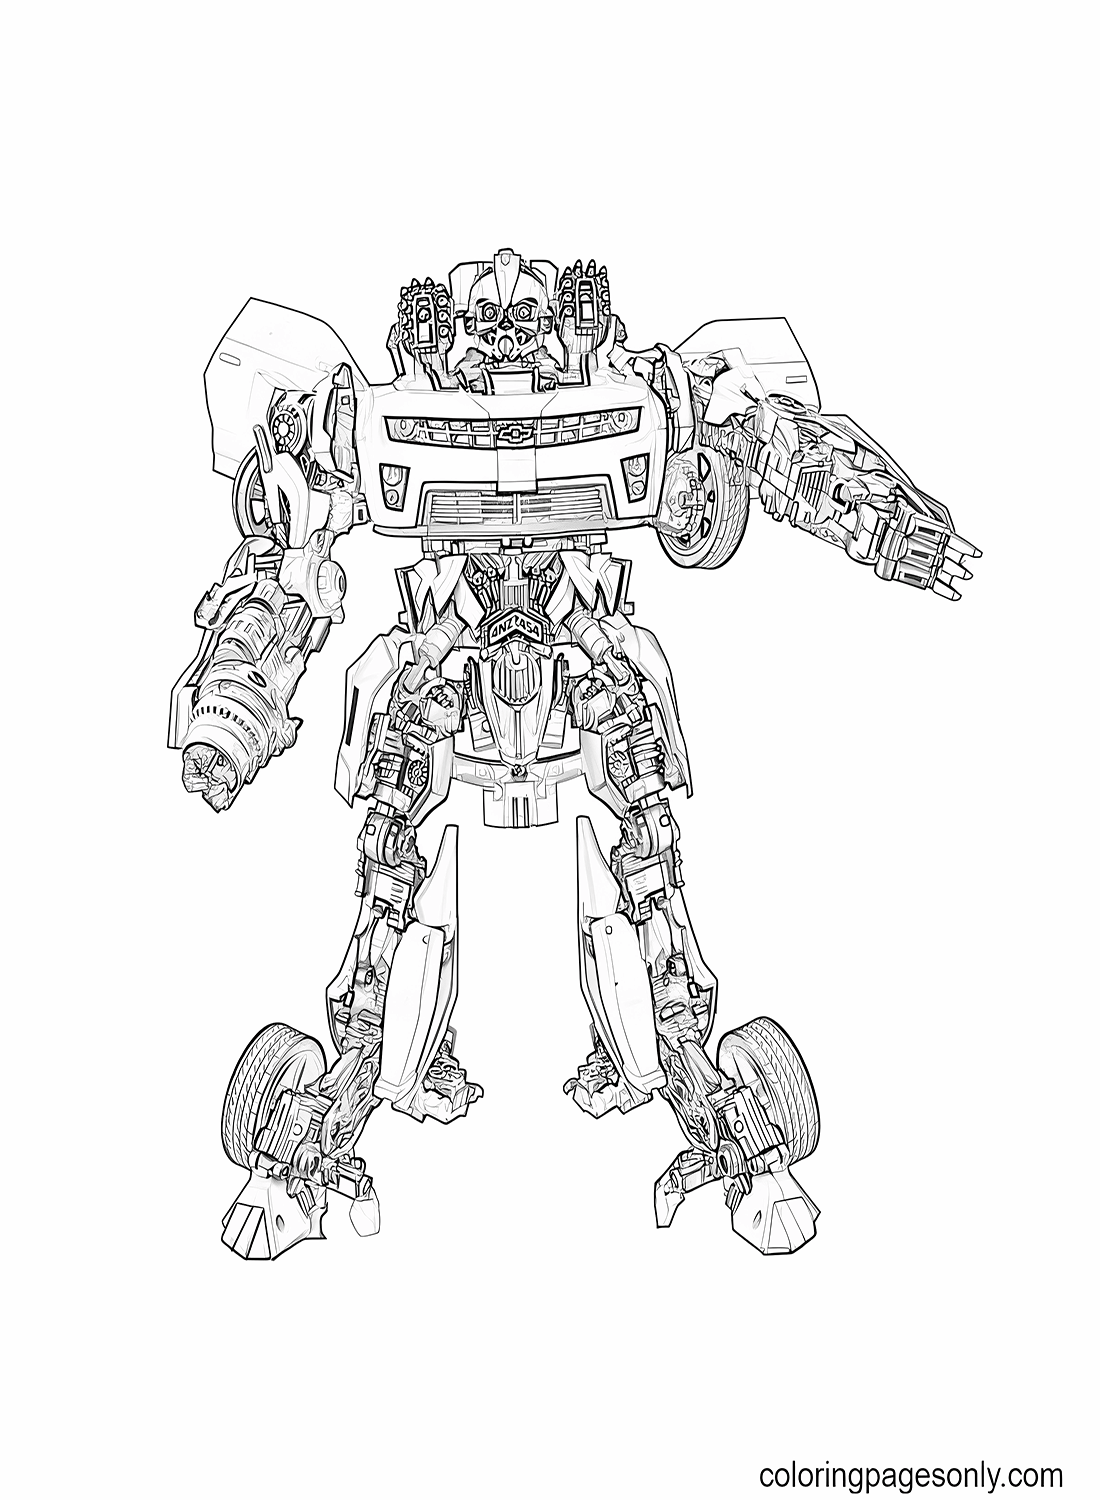 Printable Transformers Bumblebee Coloring Page